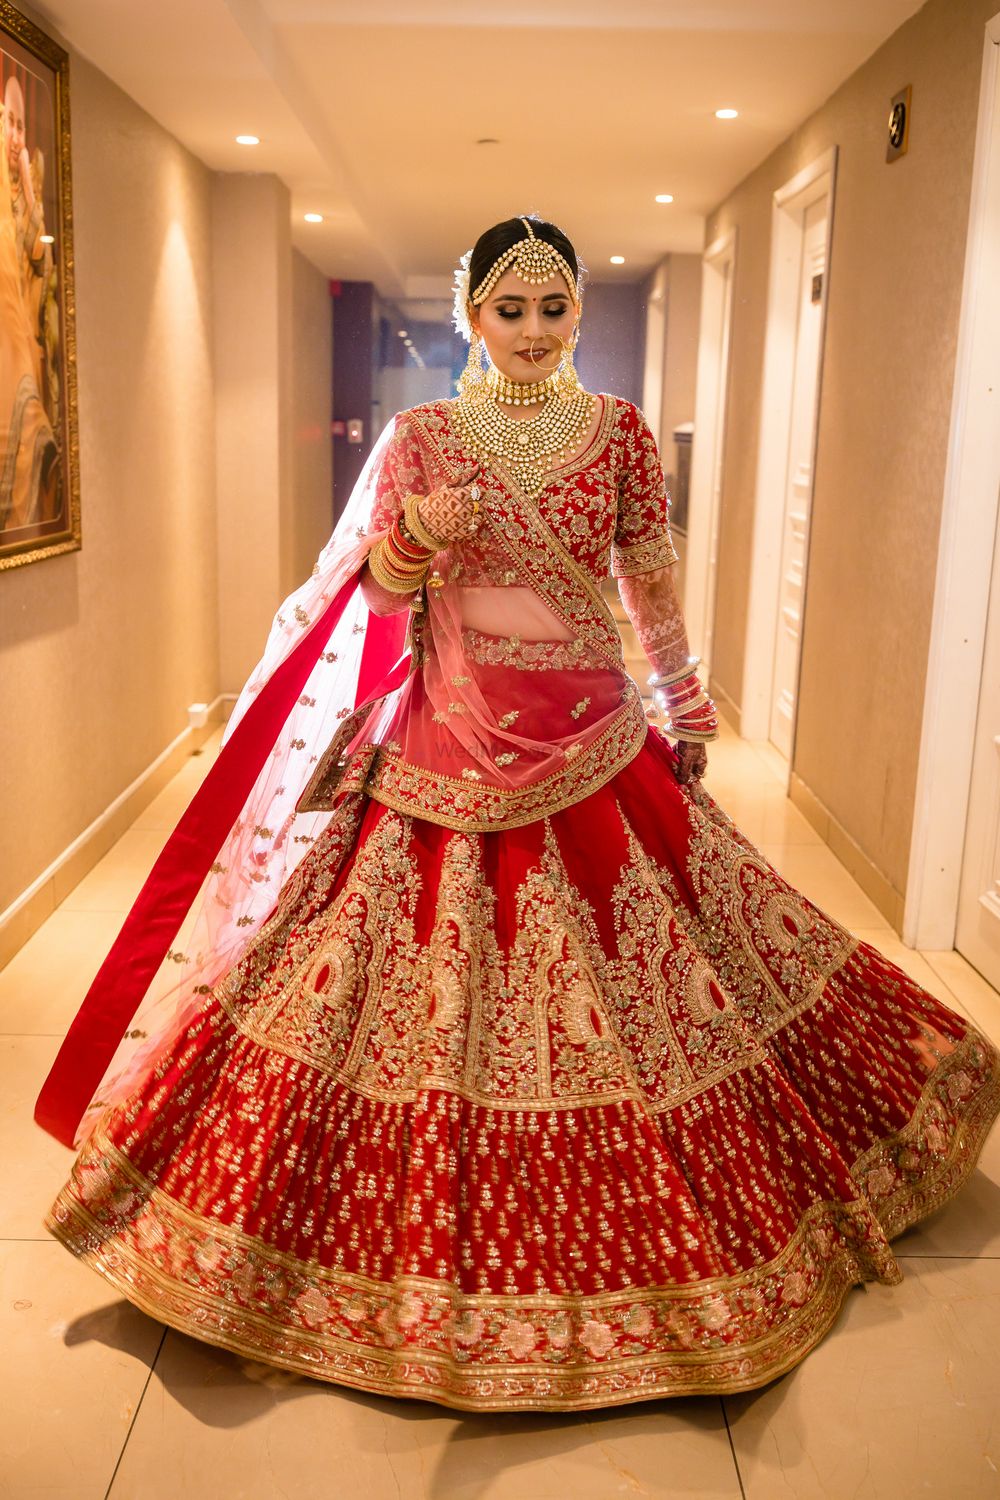 Photo of Bride in a heavy red and gold bridal lehenga